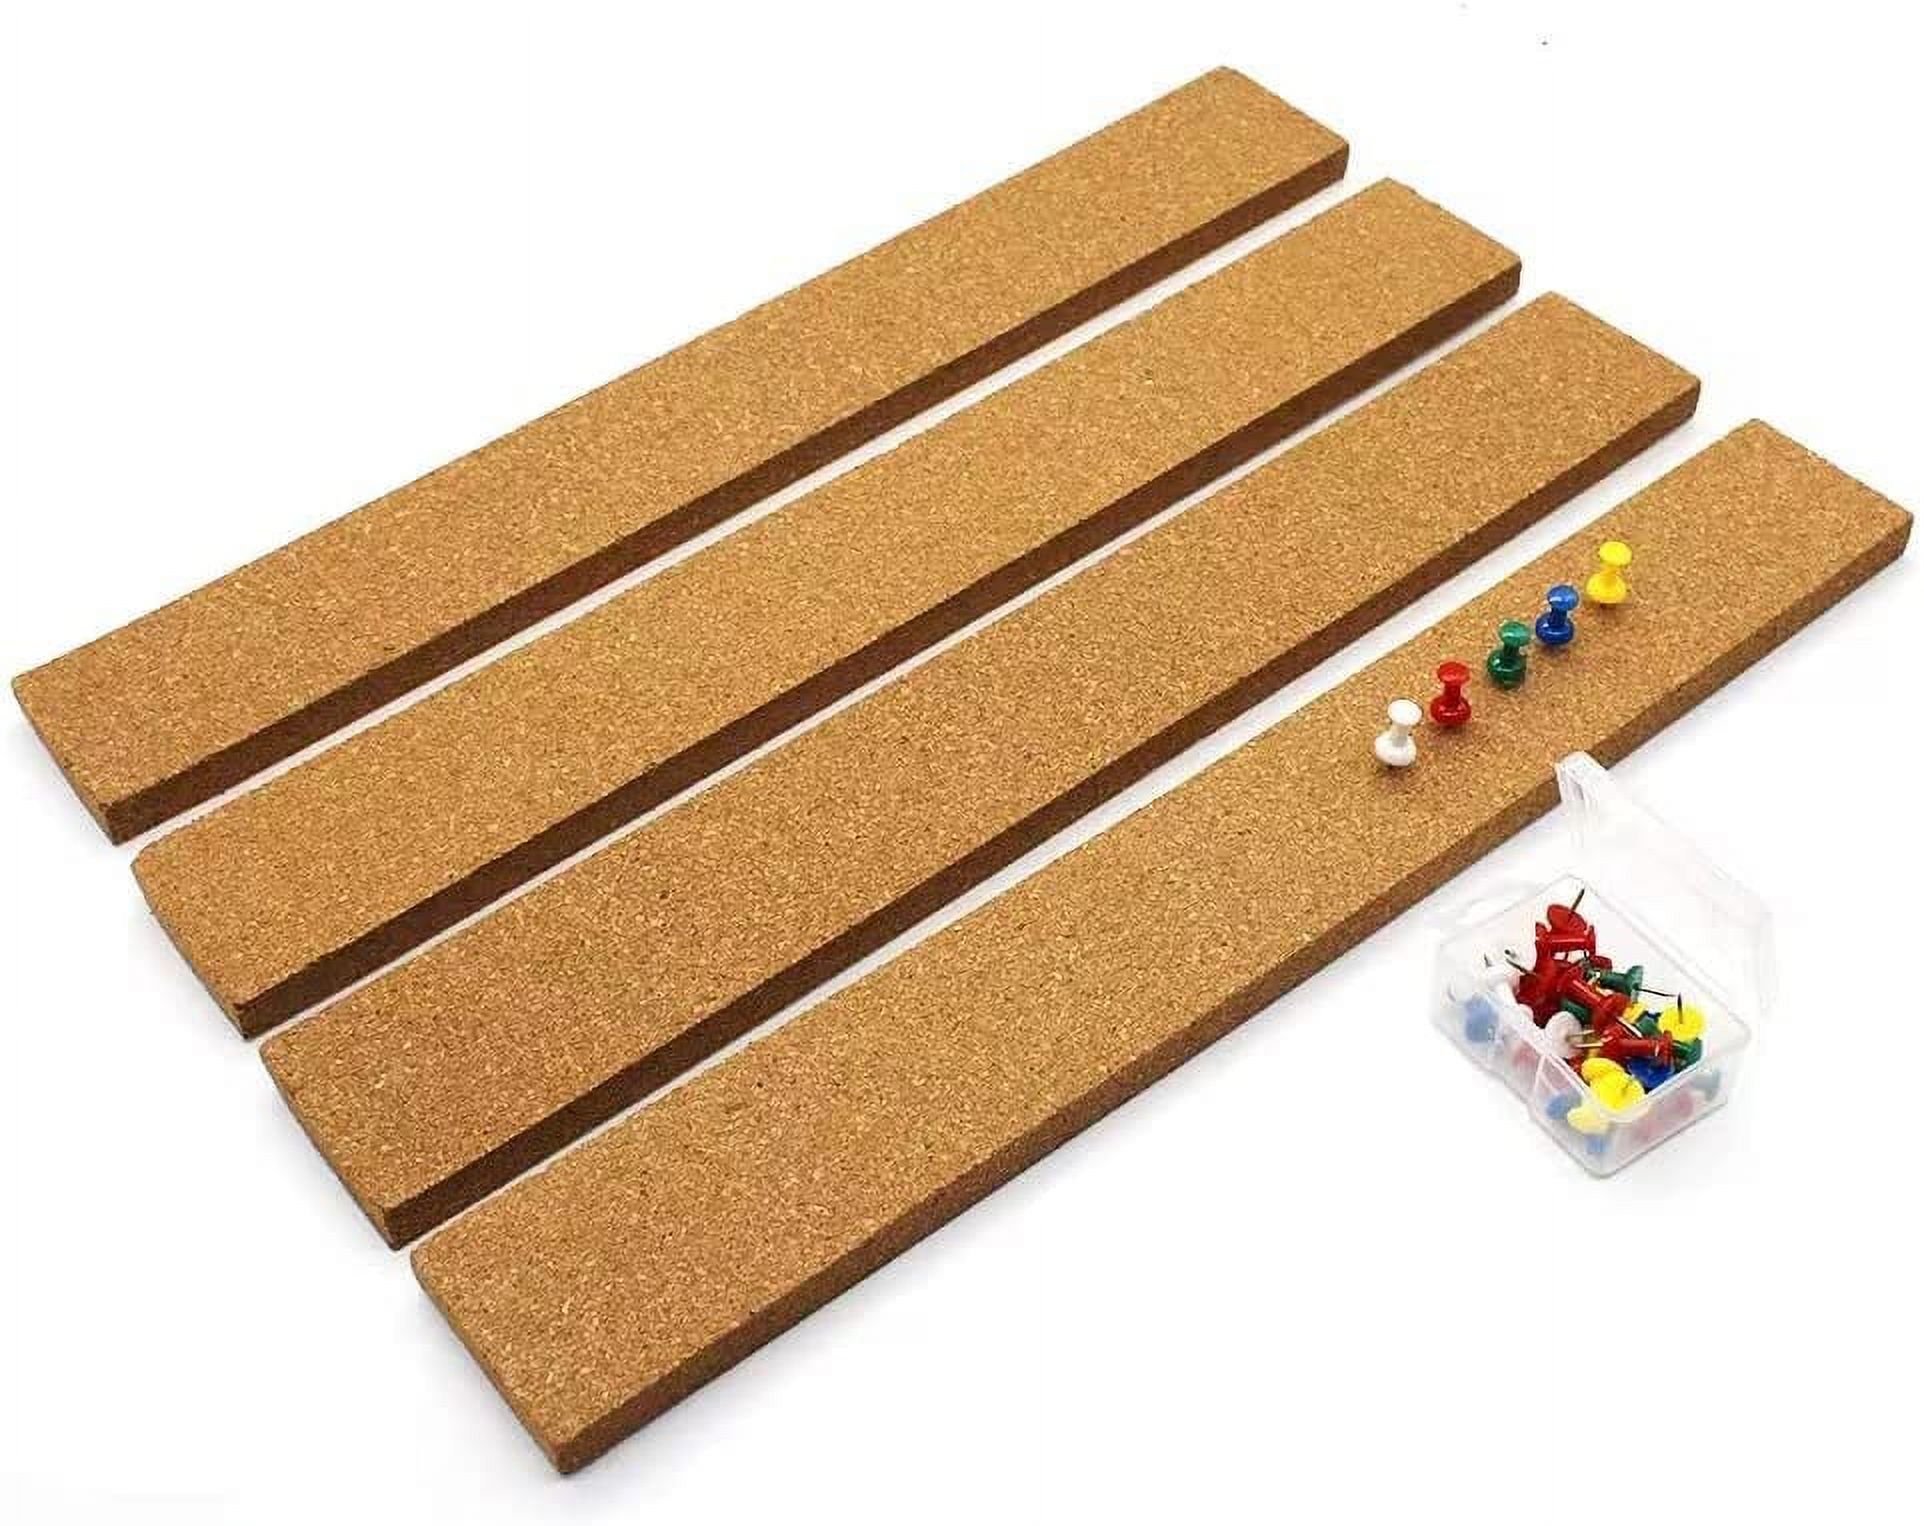 4 Pack Self-Adhesive Cork Board Roll-Wall Thick Bulletin Board with 50  Multi-Color Push Pins-15 inch x 2 inch- Ultra Strength Adhesive Backing for  Office, Home, School- Note Pads is Gift 